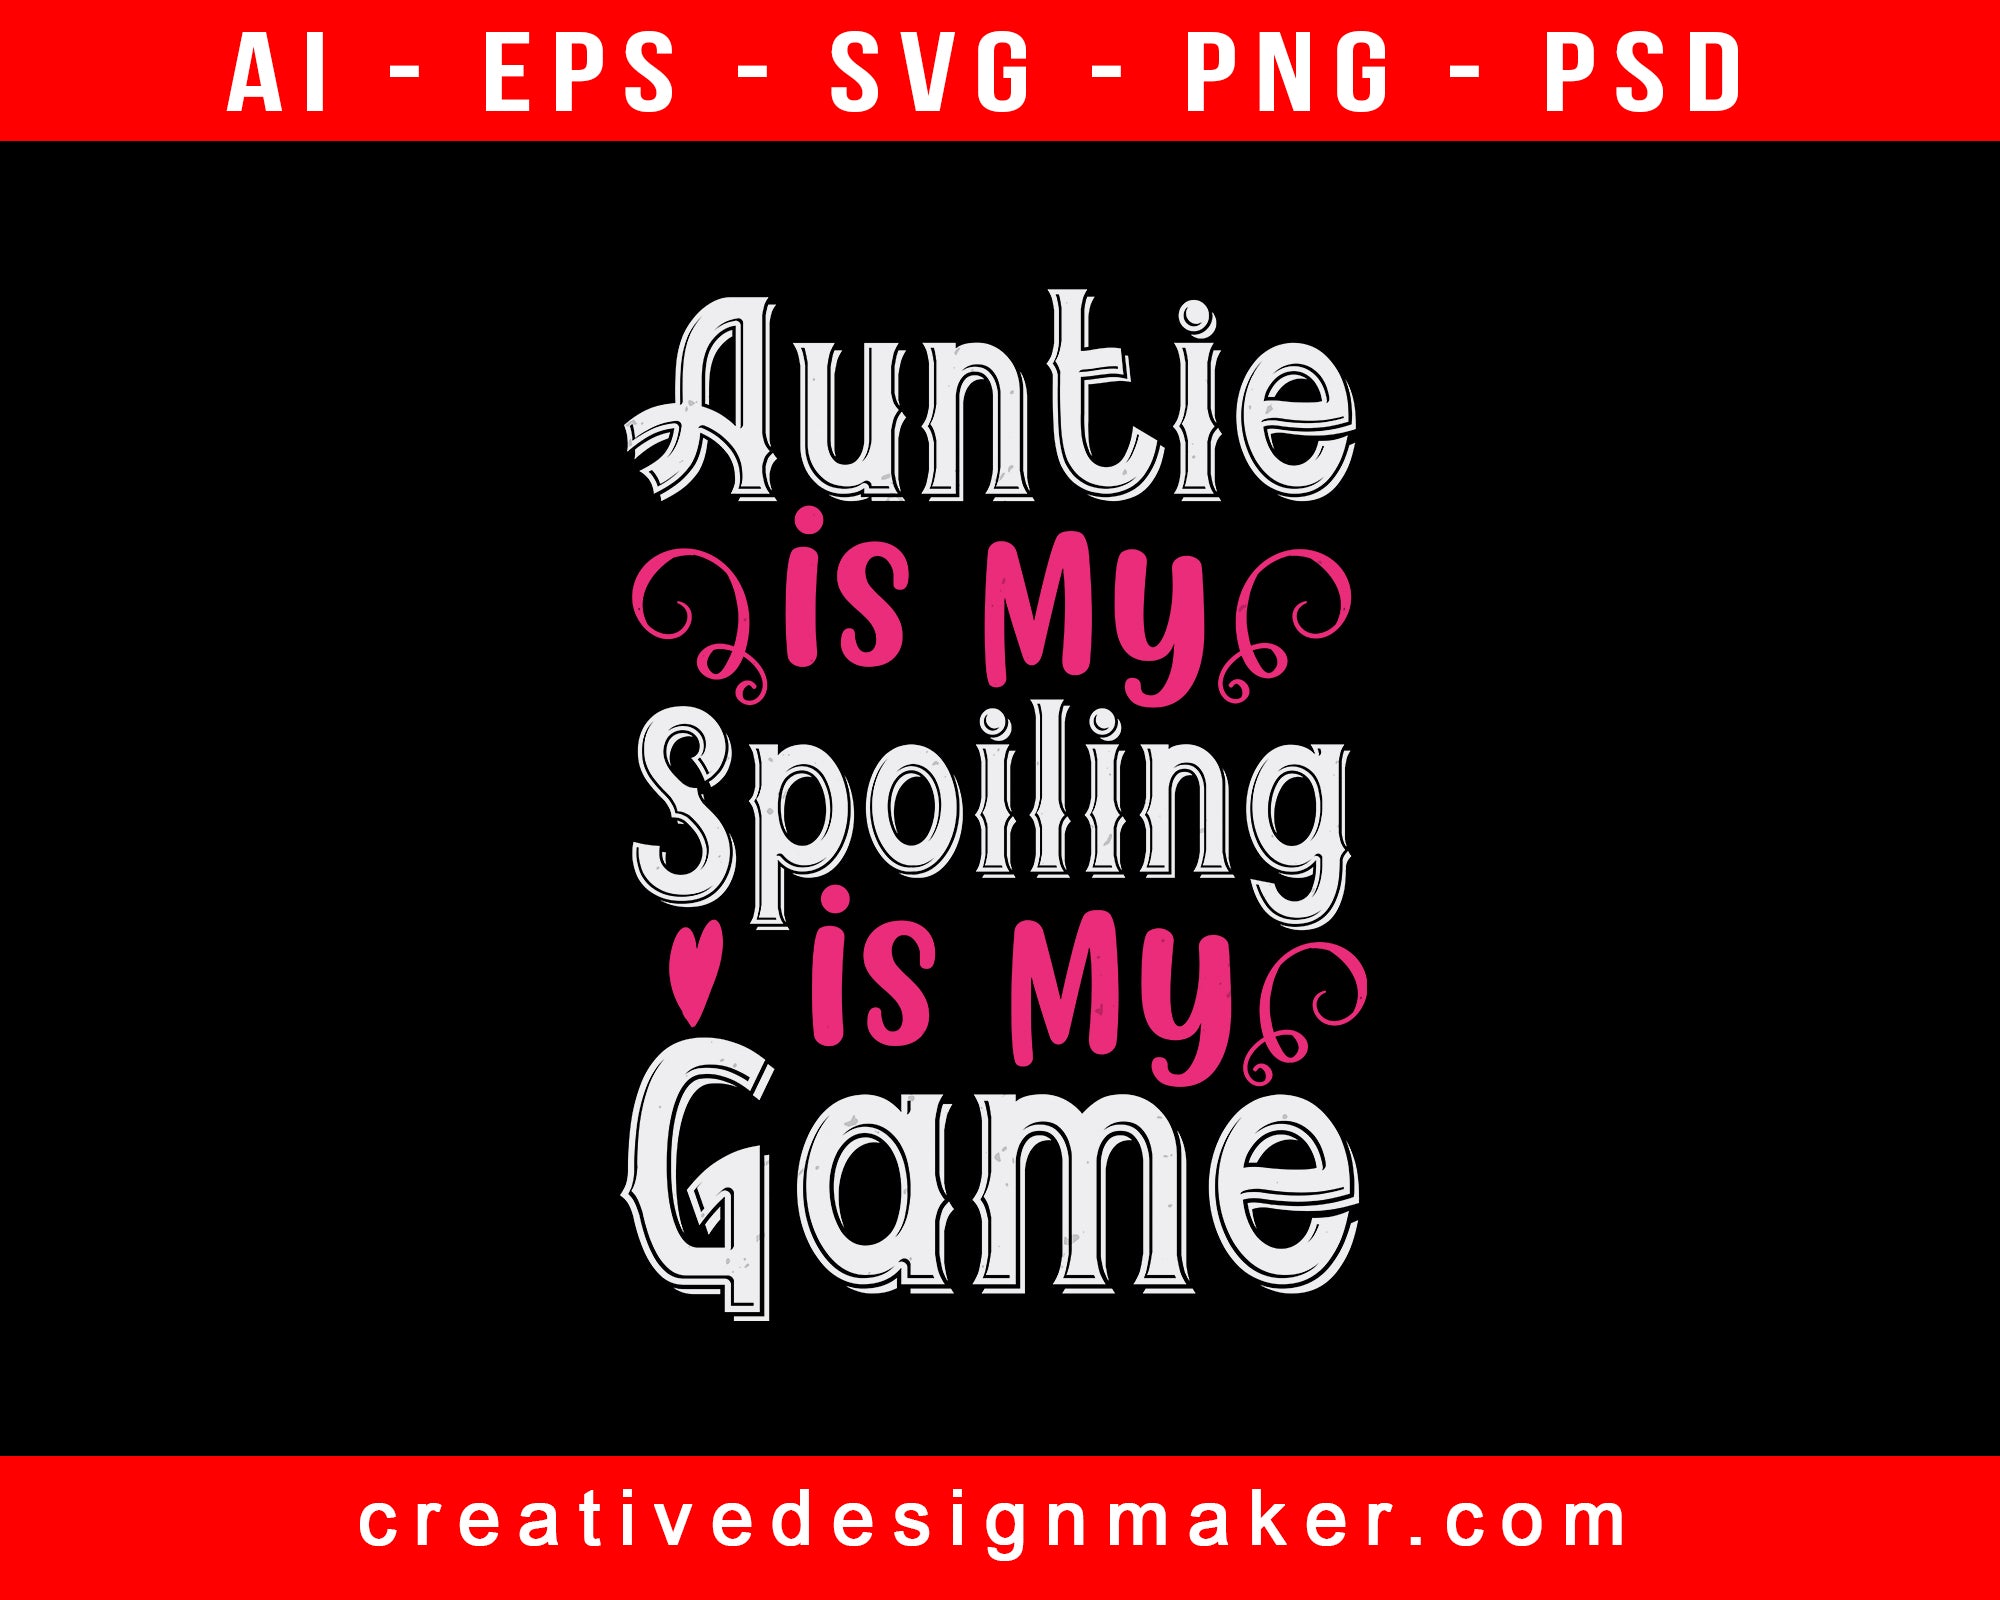 Auntie Is My Name Spoiling Is My Game Print Ready Editable T-Shirt SVG Design!